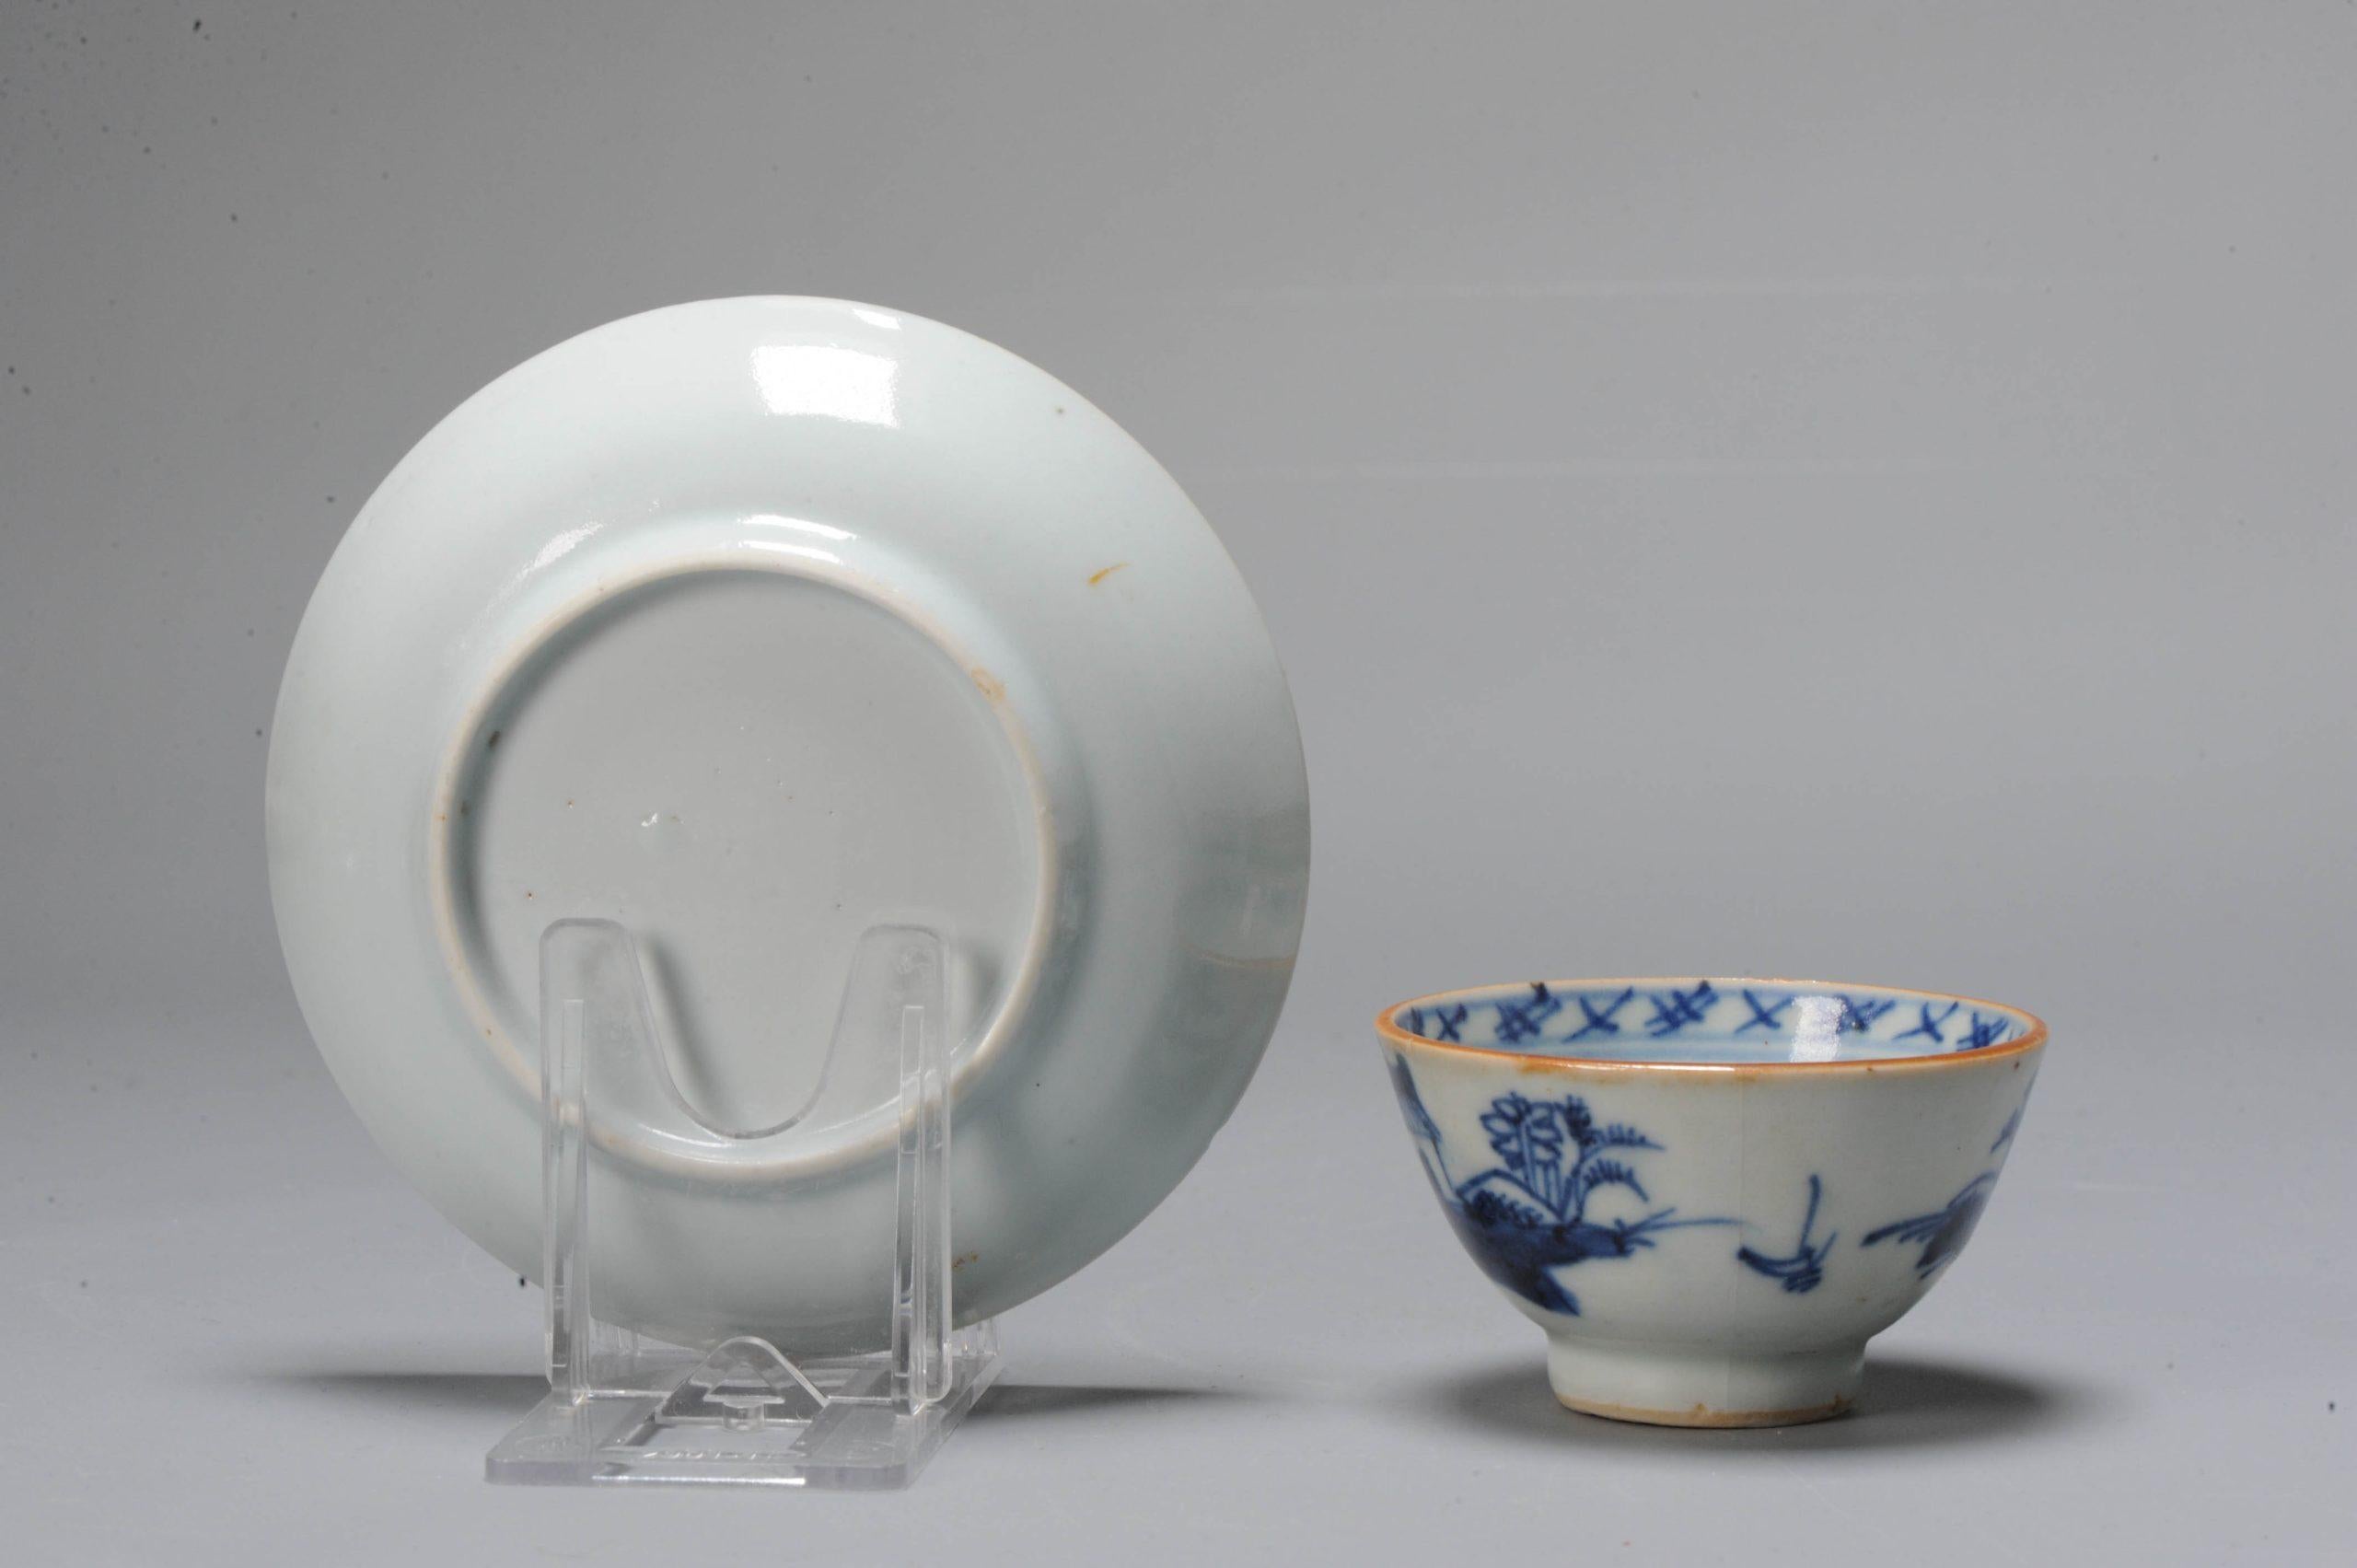 A Chinese Export Porcelain Blue and White Teabowl and Saucer In Good Condition For Sale In Amsterdam, Noord Holland